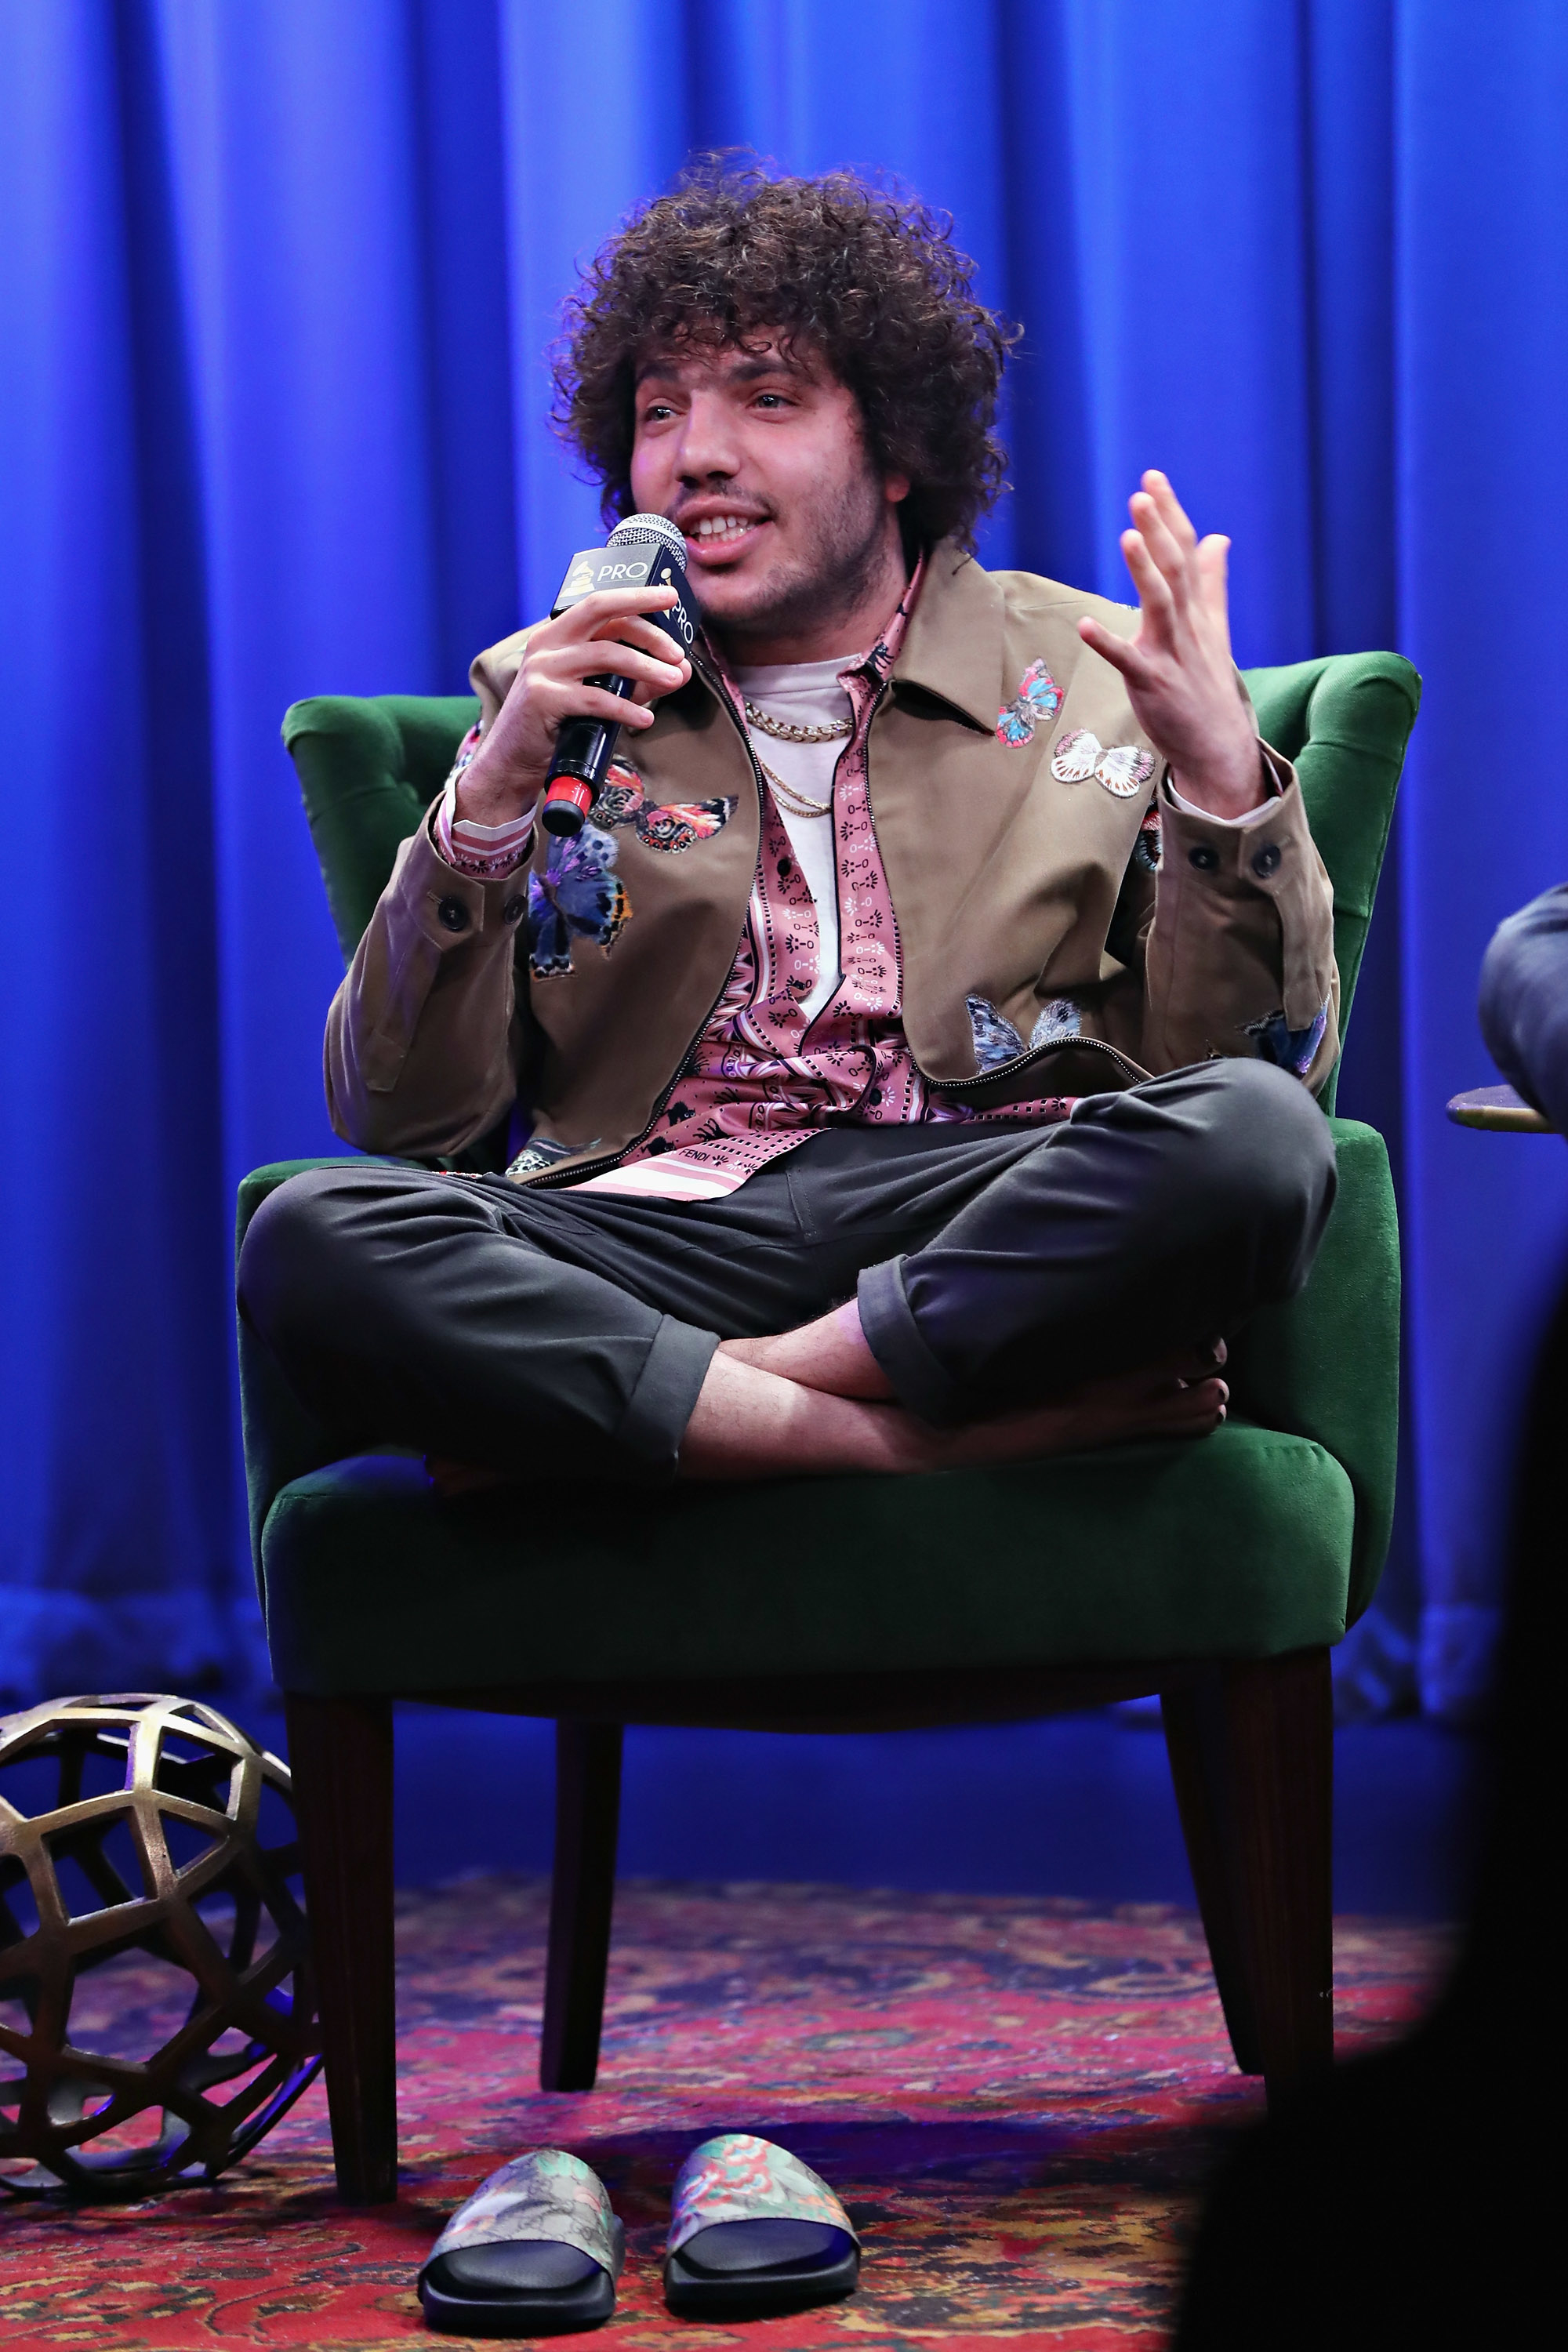 Close-up of Benny sitting cross-legged in a chair and holding a microphone